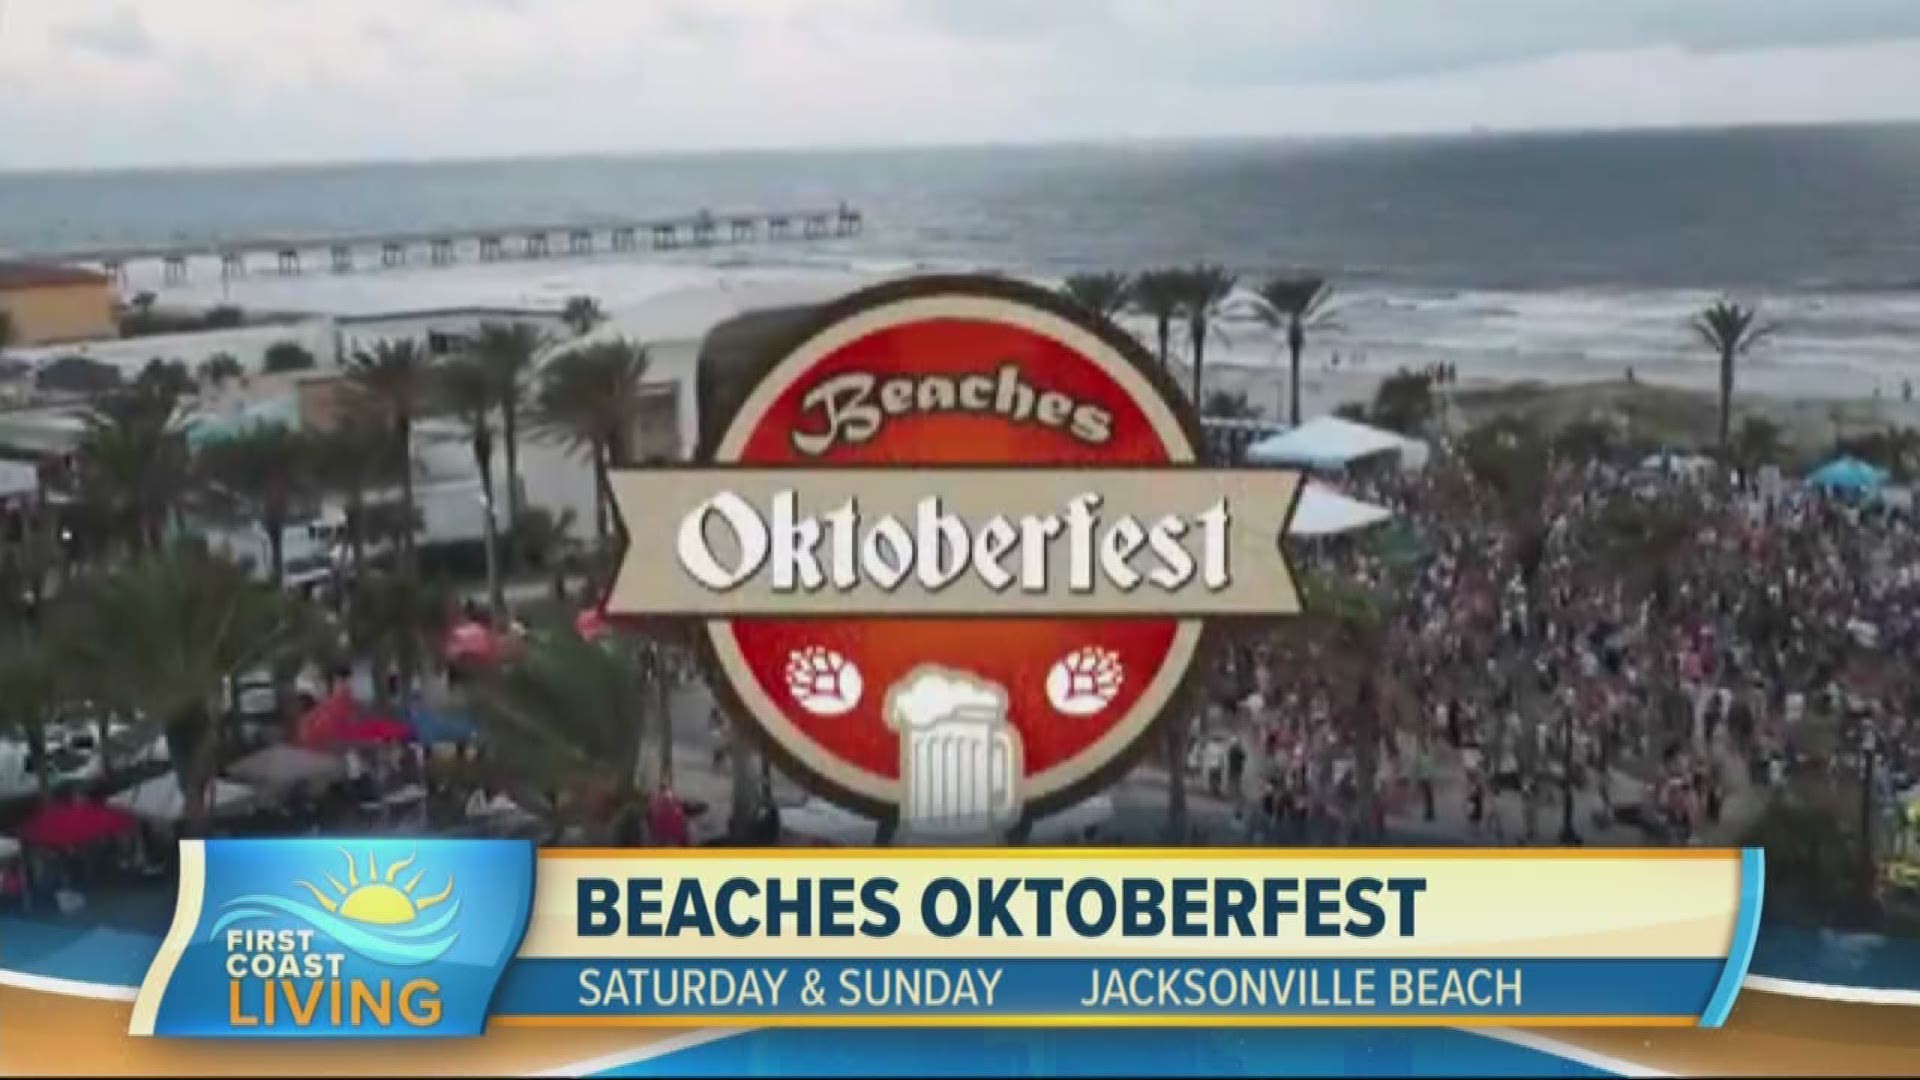 From unique beers and food to music and games, there is so much to be had at the 6th annual Beaches Oktober Fest happening in Jacksonville.